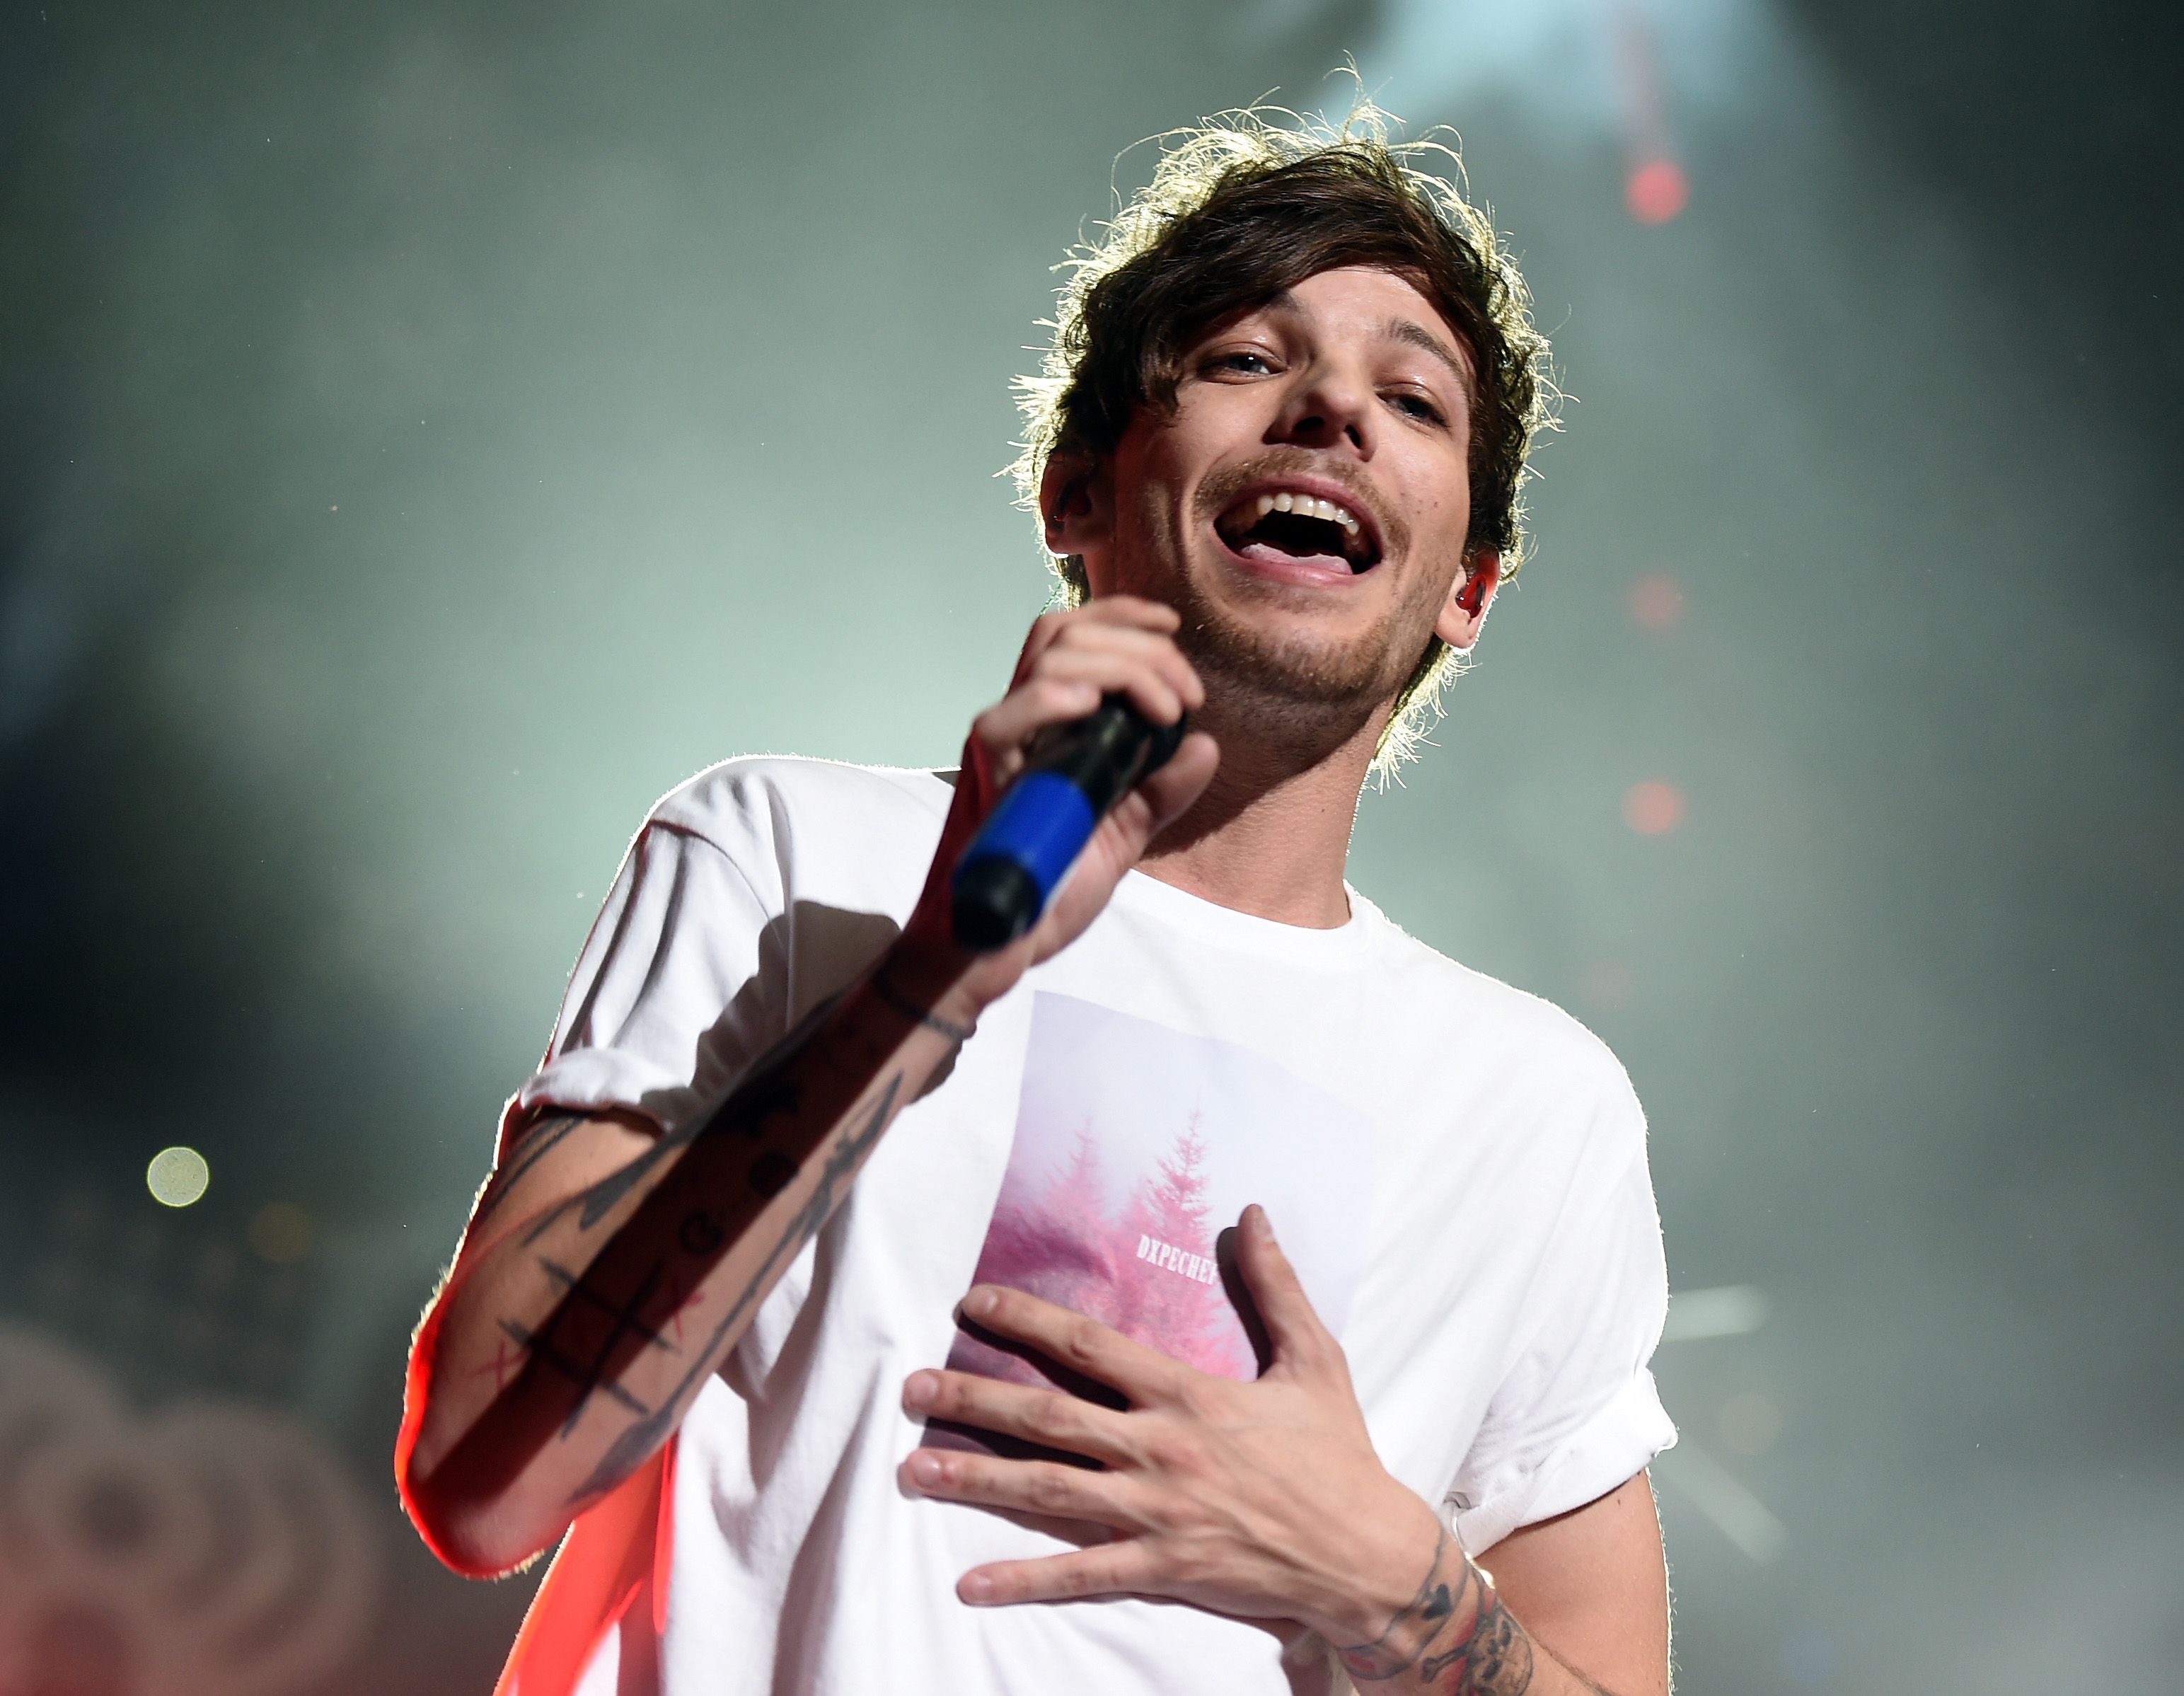 Louis Tomlinson music, videos, stats, and photos